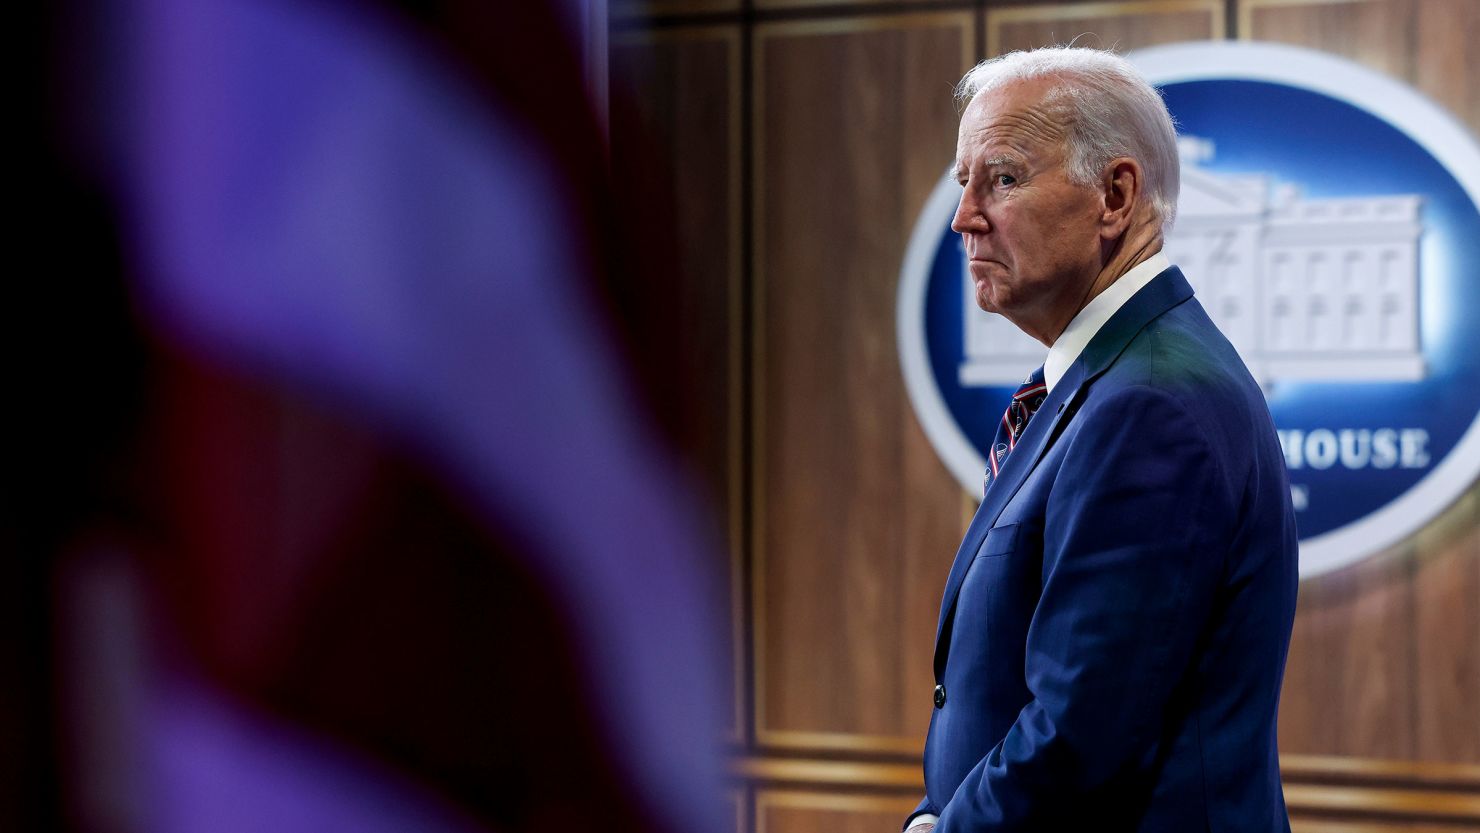 President Joe Biden listens at an event at the South Court Auditorium in the Eisenhower Executive Office Building at the White House on October 23, in Washington, DC.